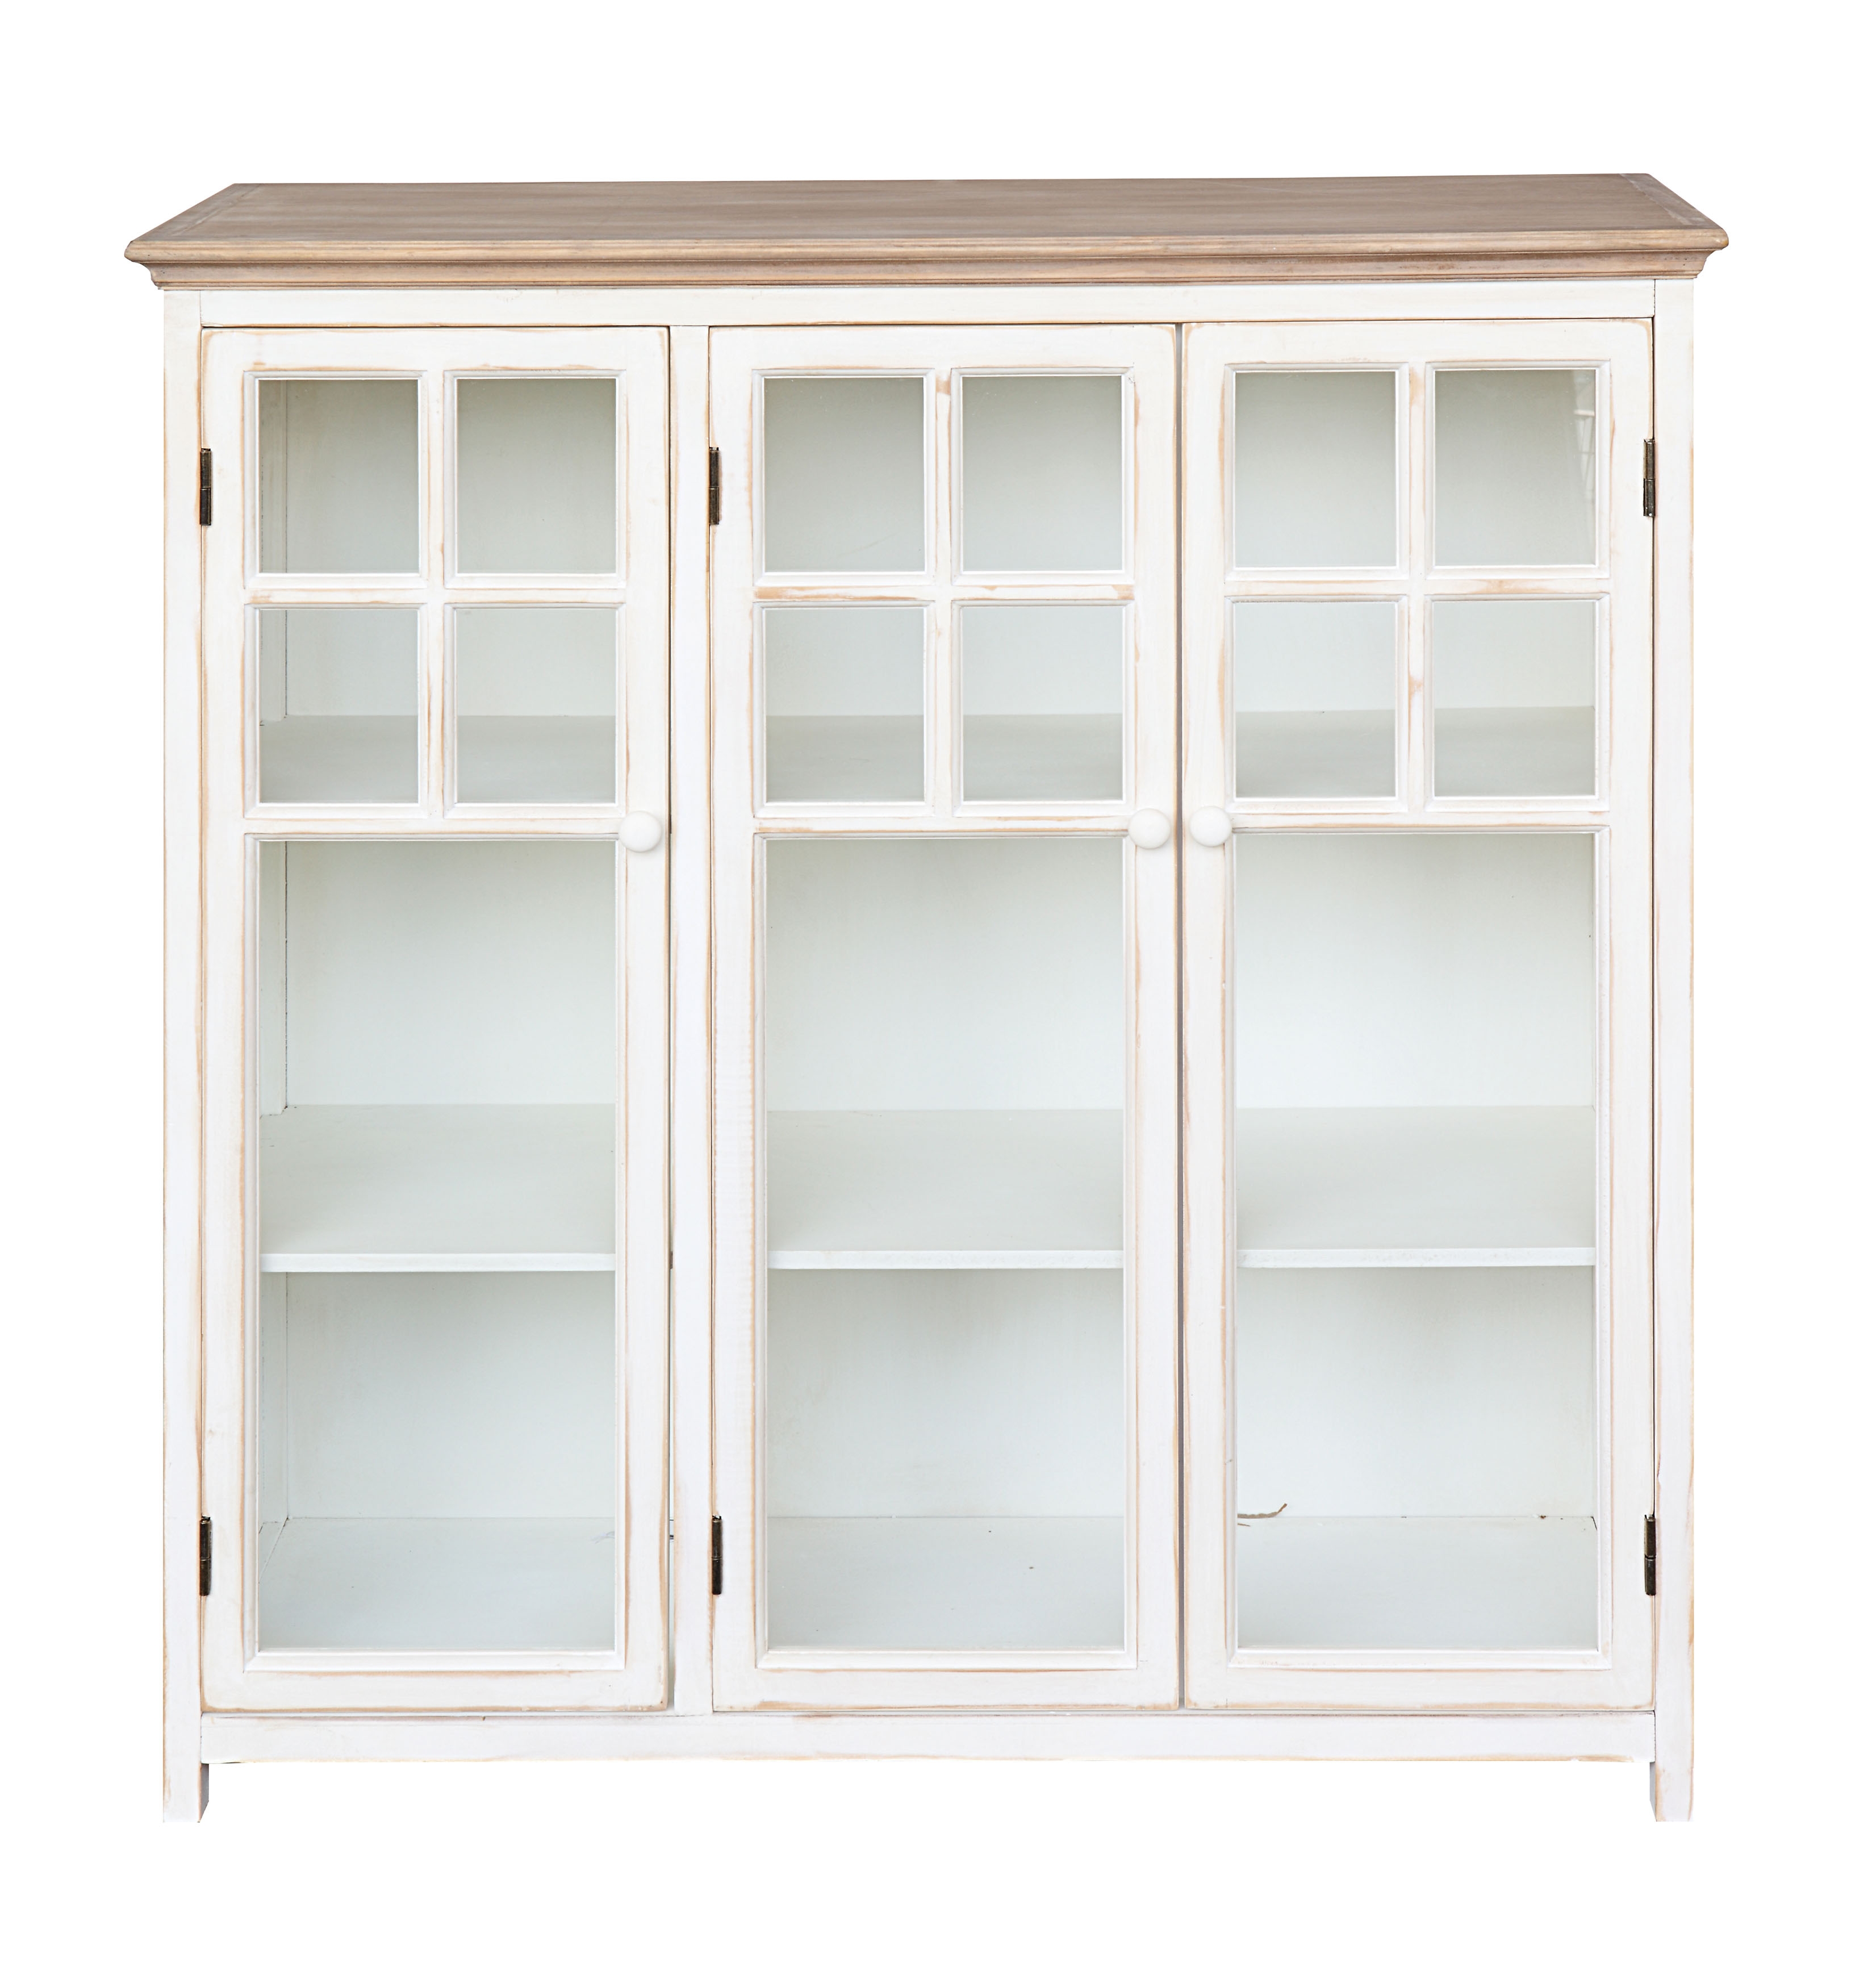 Wood Cabinet with 3 Shelves & 3 Glass Doors - Image 0